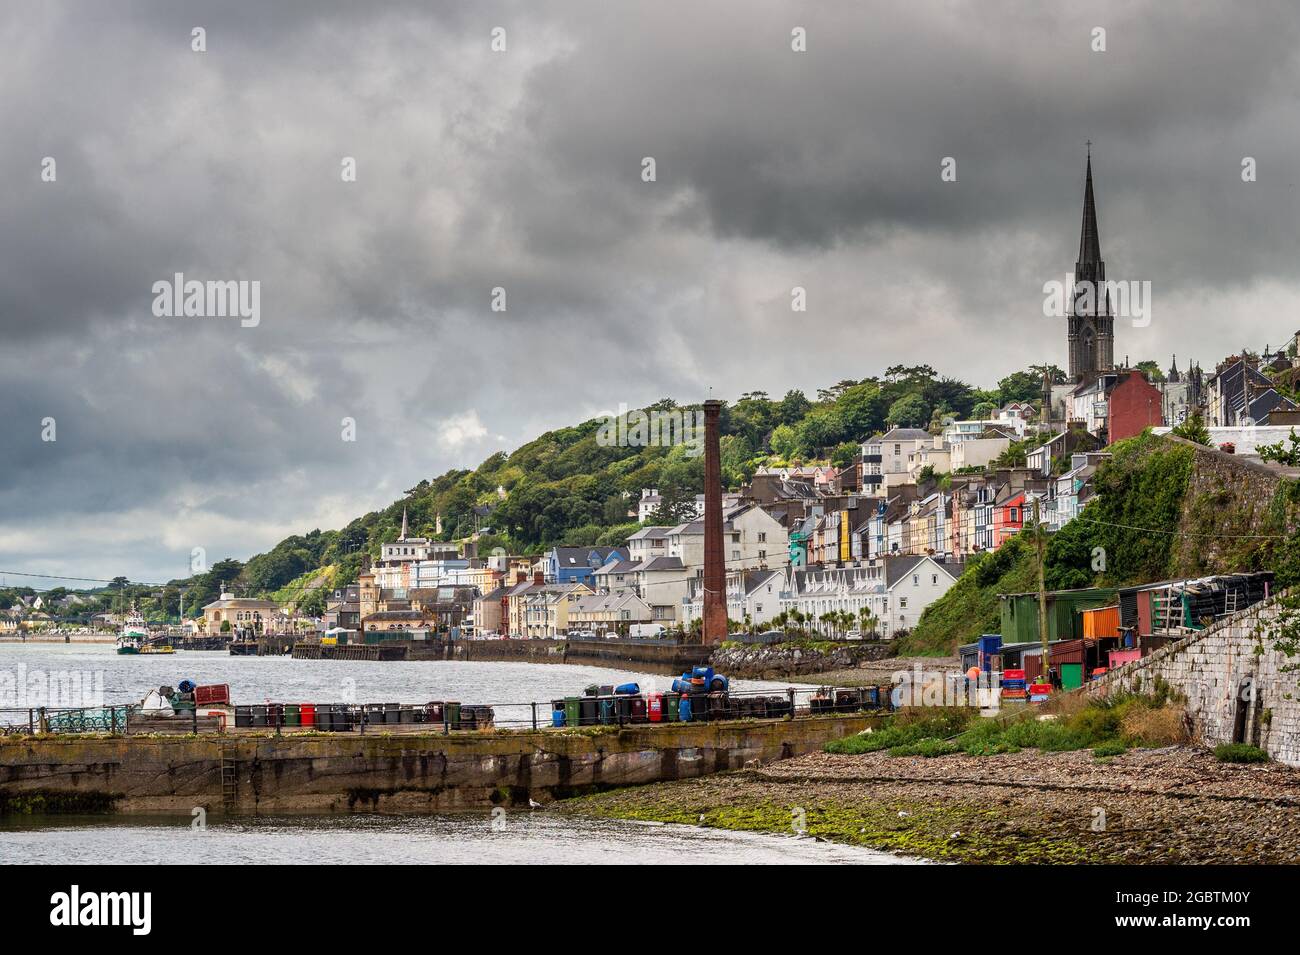 Cobh, County Cork, Ireland. 5th Aug, 2021. Met Éireann has issued a yellow weather warning for heavy rain and thunderstorms which will lead to localised flooding and hazardous driving conditions. The warning is in place until 22.00 tonight. Cobh town was hit by showers all day today. Credit: AG News/Alamy Live News Stock Photo